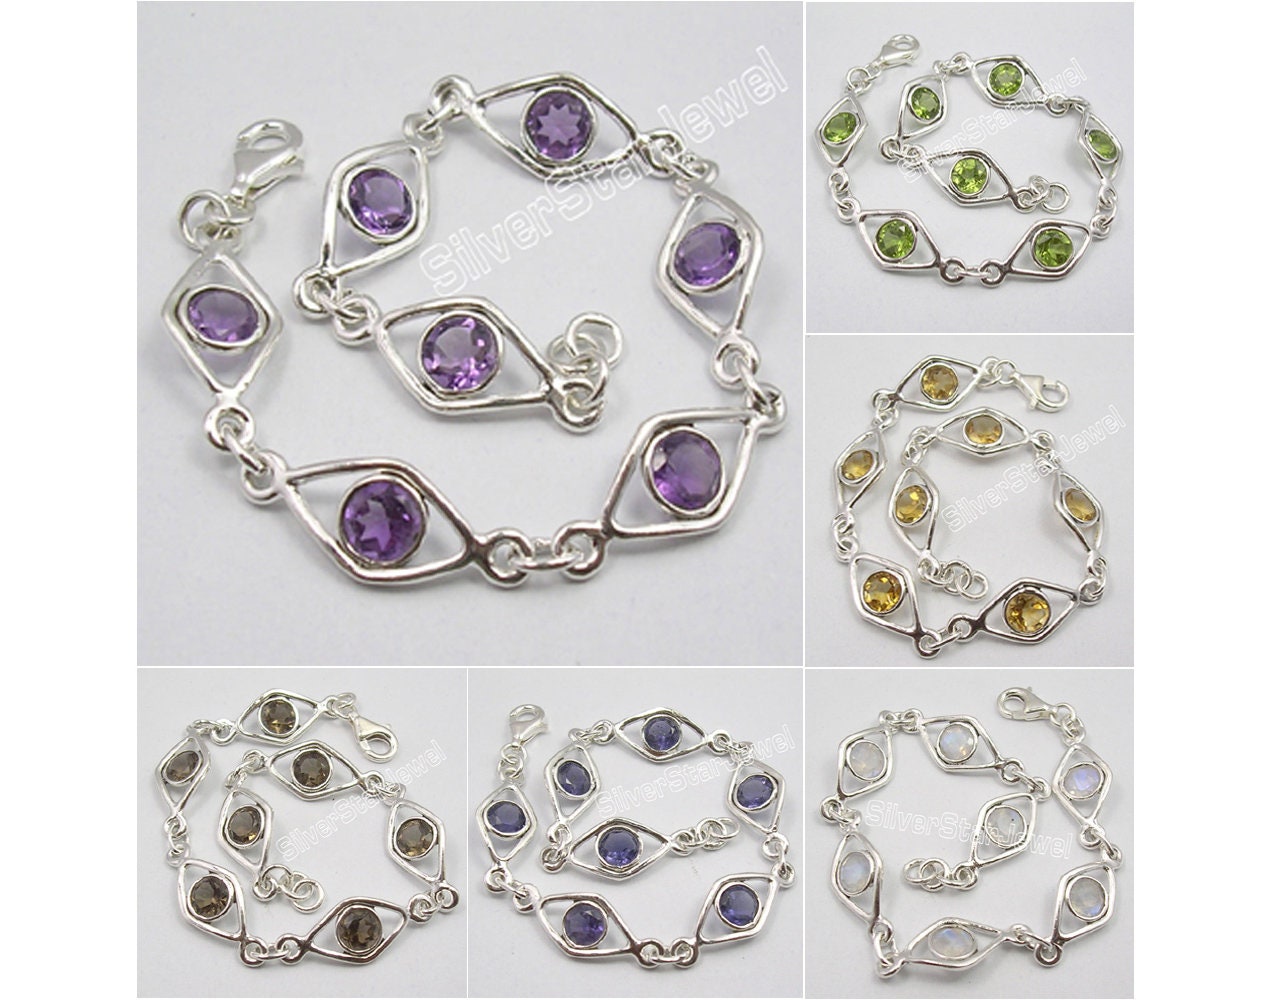 .925 Sterling Silver Beautiful CUT AMETHYST MADE IN INDIA Bracelet 7.7" 